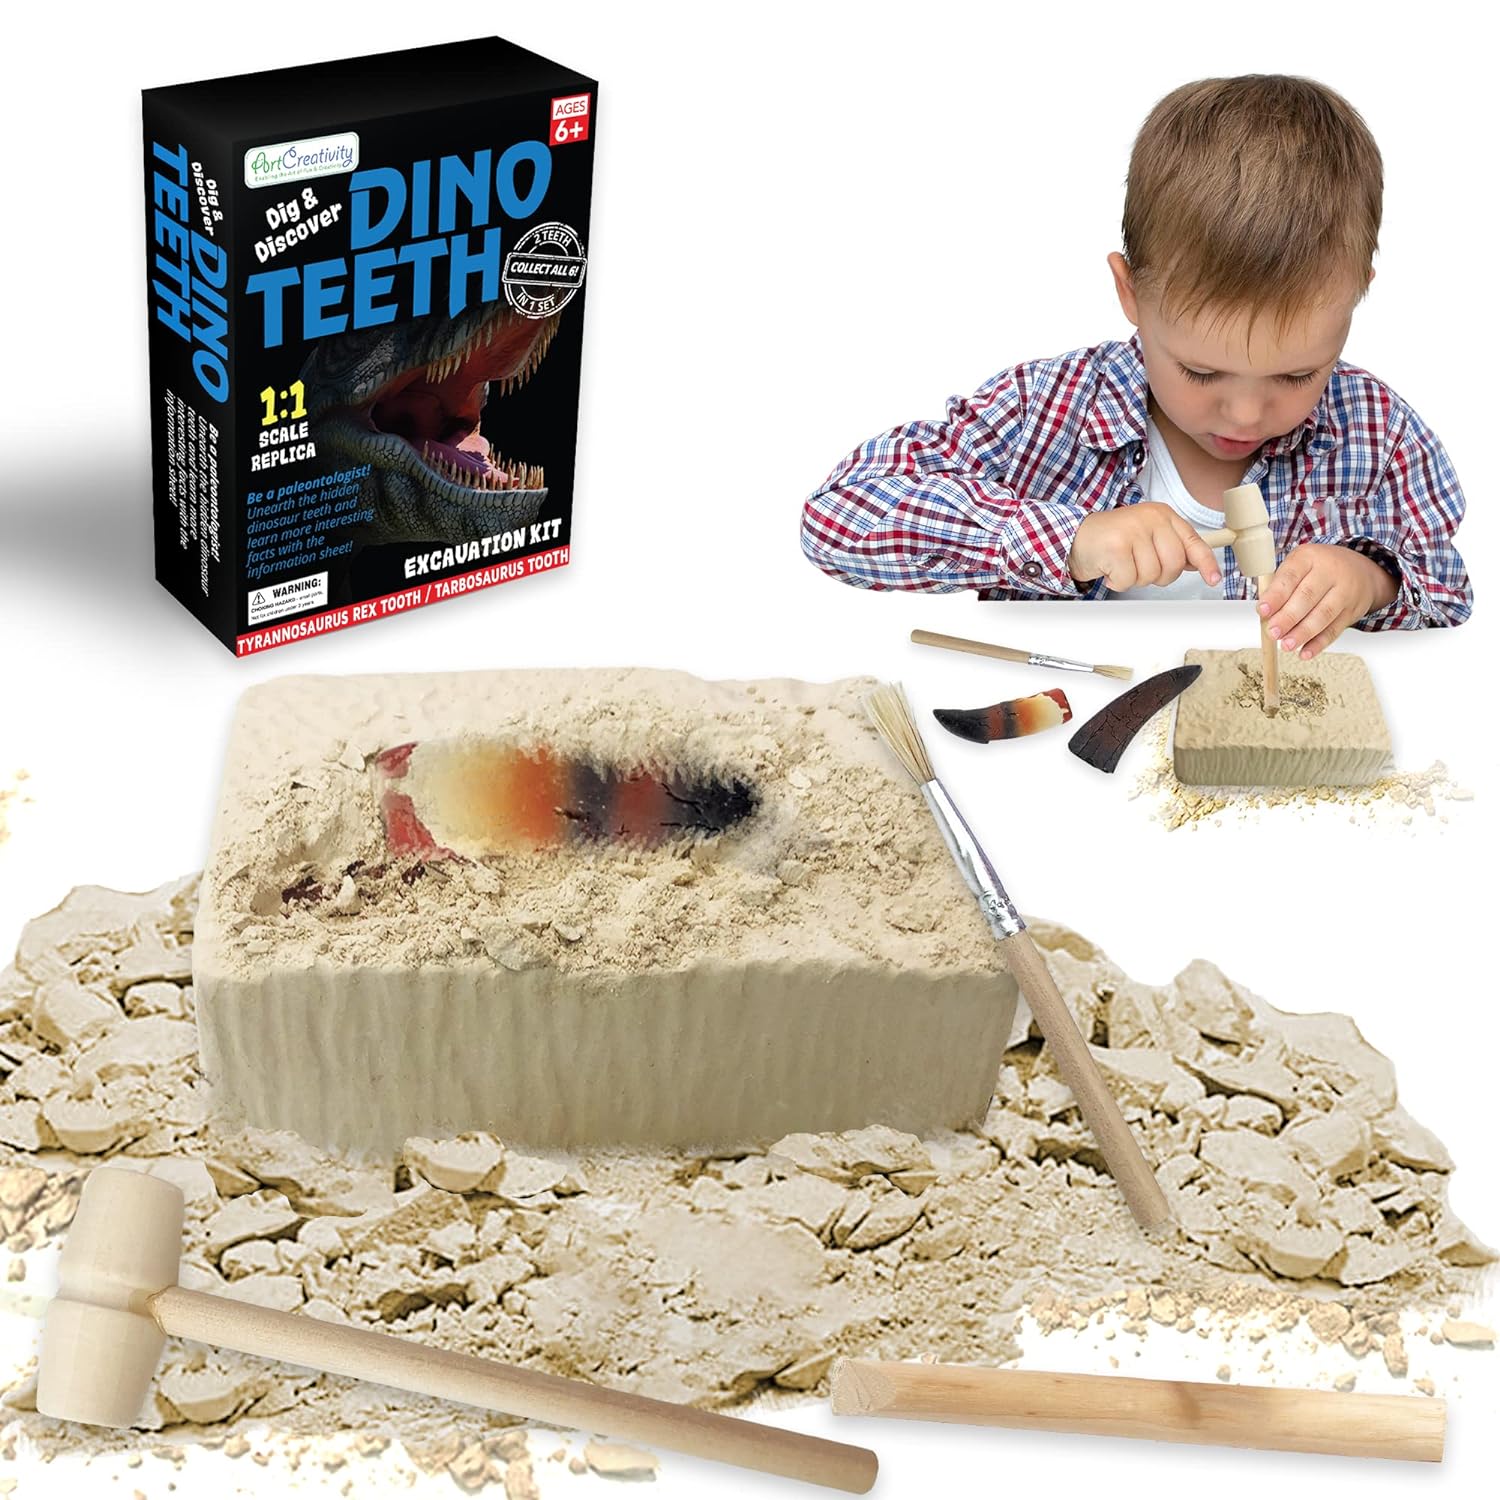 Dino Teeth Dig and Discover Excavation Kit for Kids, Includes T-rex and Tarbosaurus Toy Fossil Teeth with 2 Digging Tools